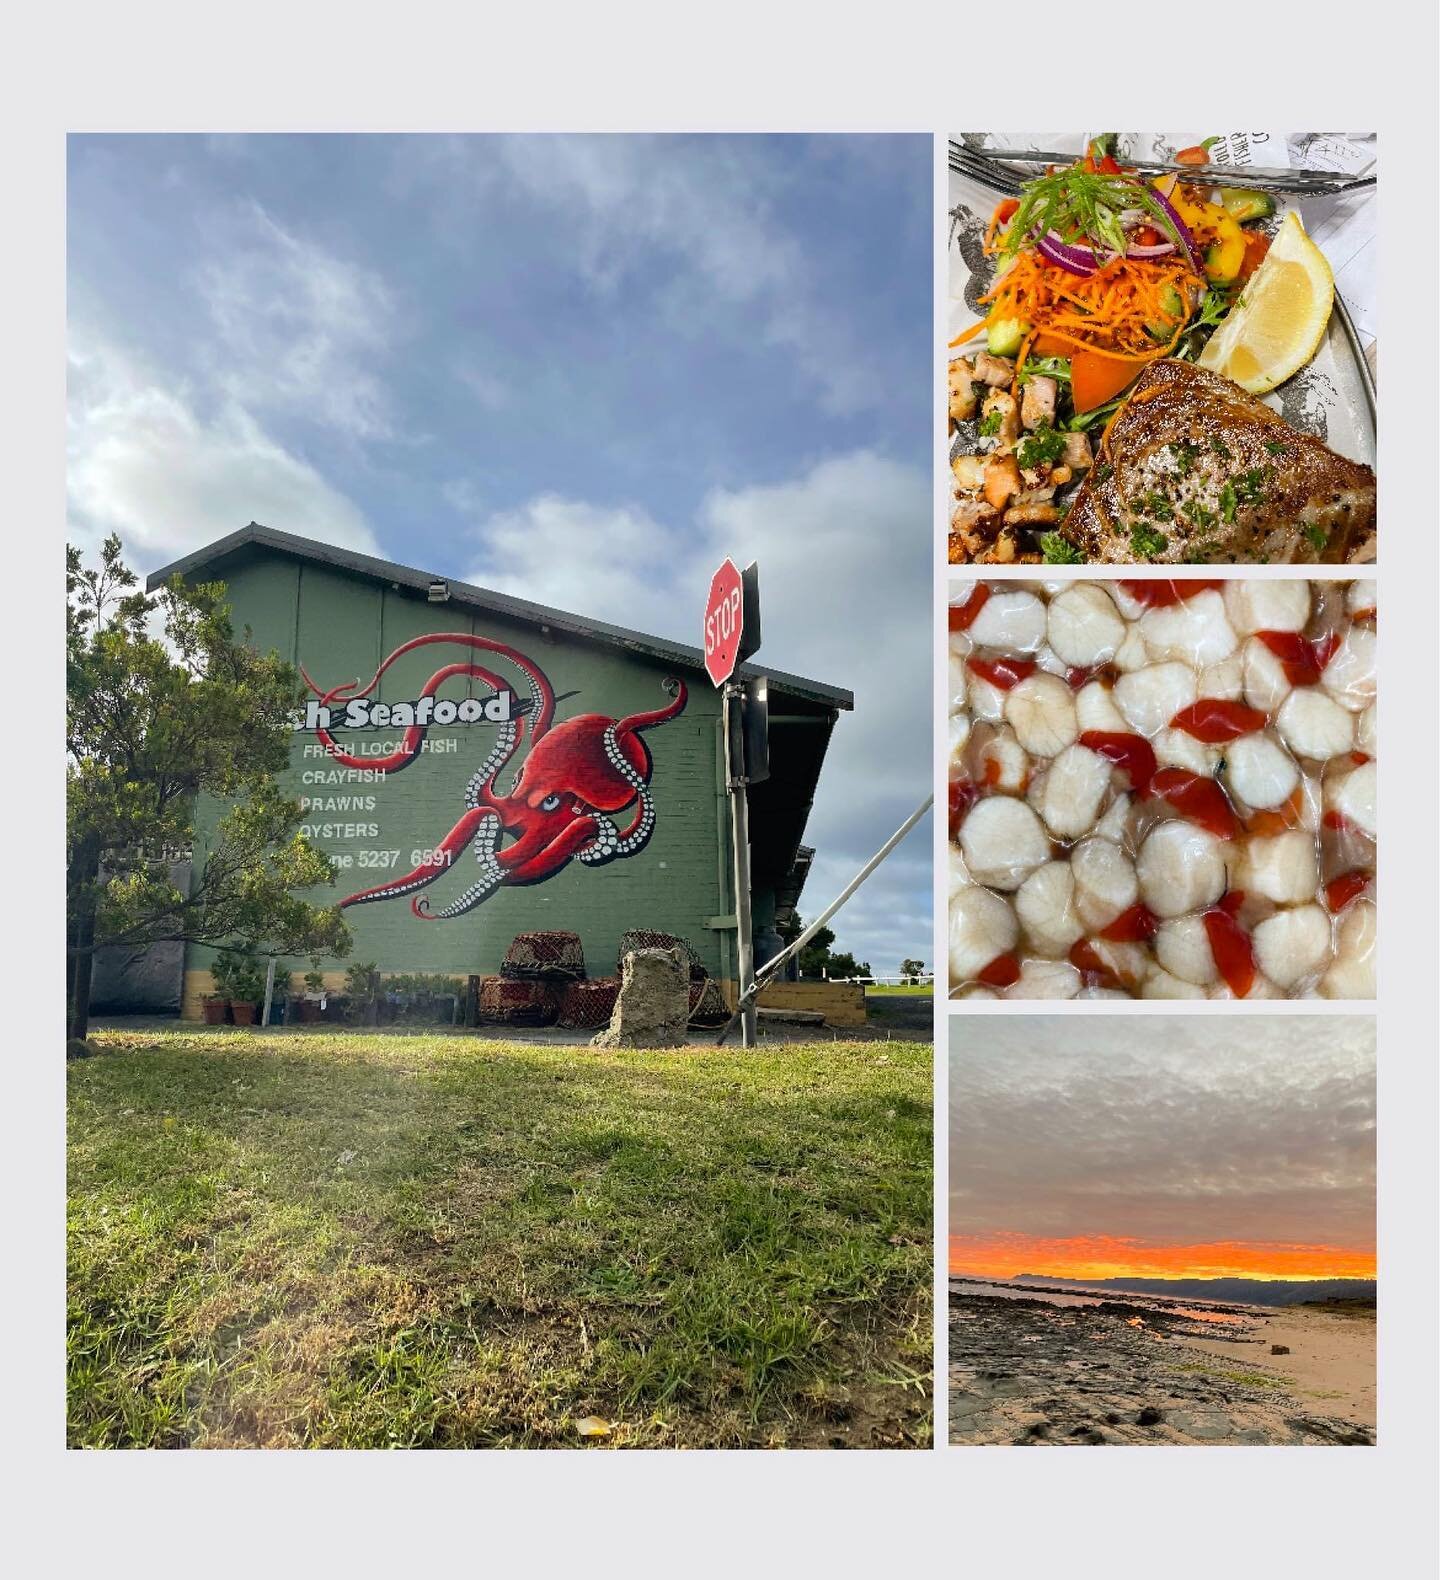 Good weekend coming up🌞
Co op on Pascoe has, Lobster, scallops, oysters, mussels, prawns,
Flake, rockling, salmon, dory,snapper fillets, gemfish, sardines, tuna.
Superb fish lunches and dinners at the harbour..
Thank you for your support.🐟🦞